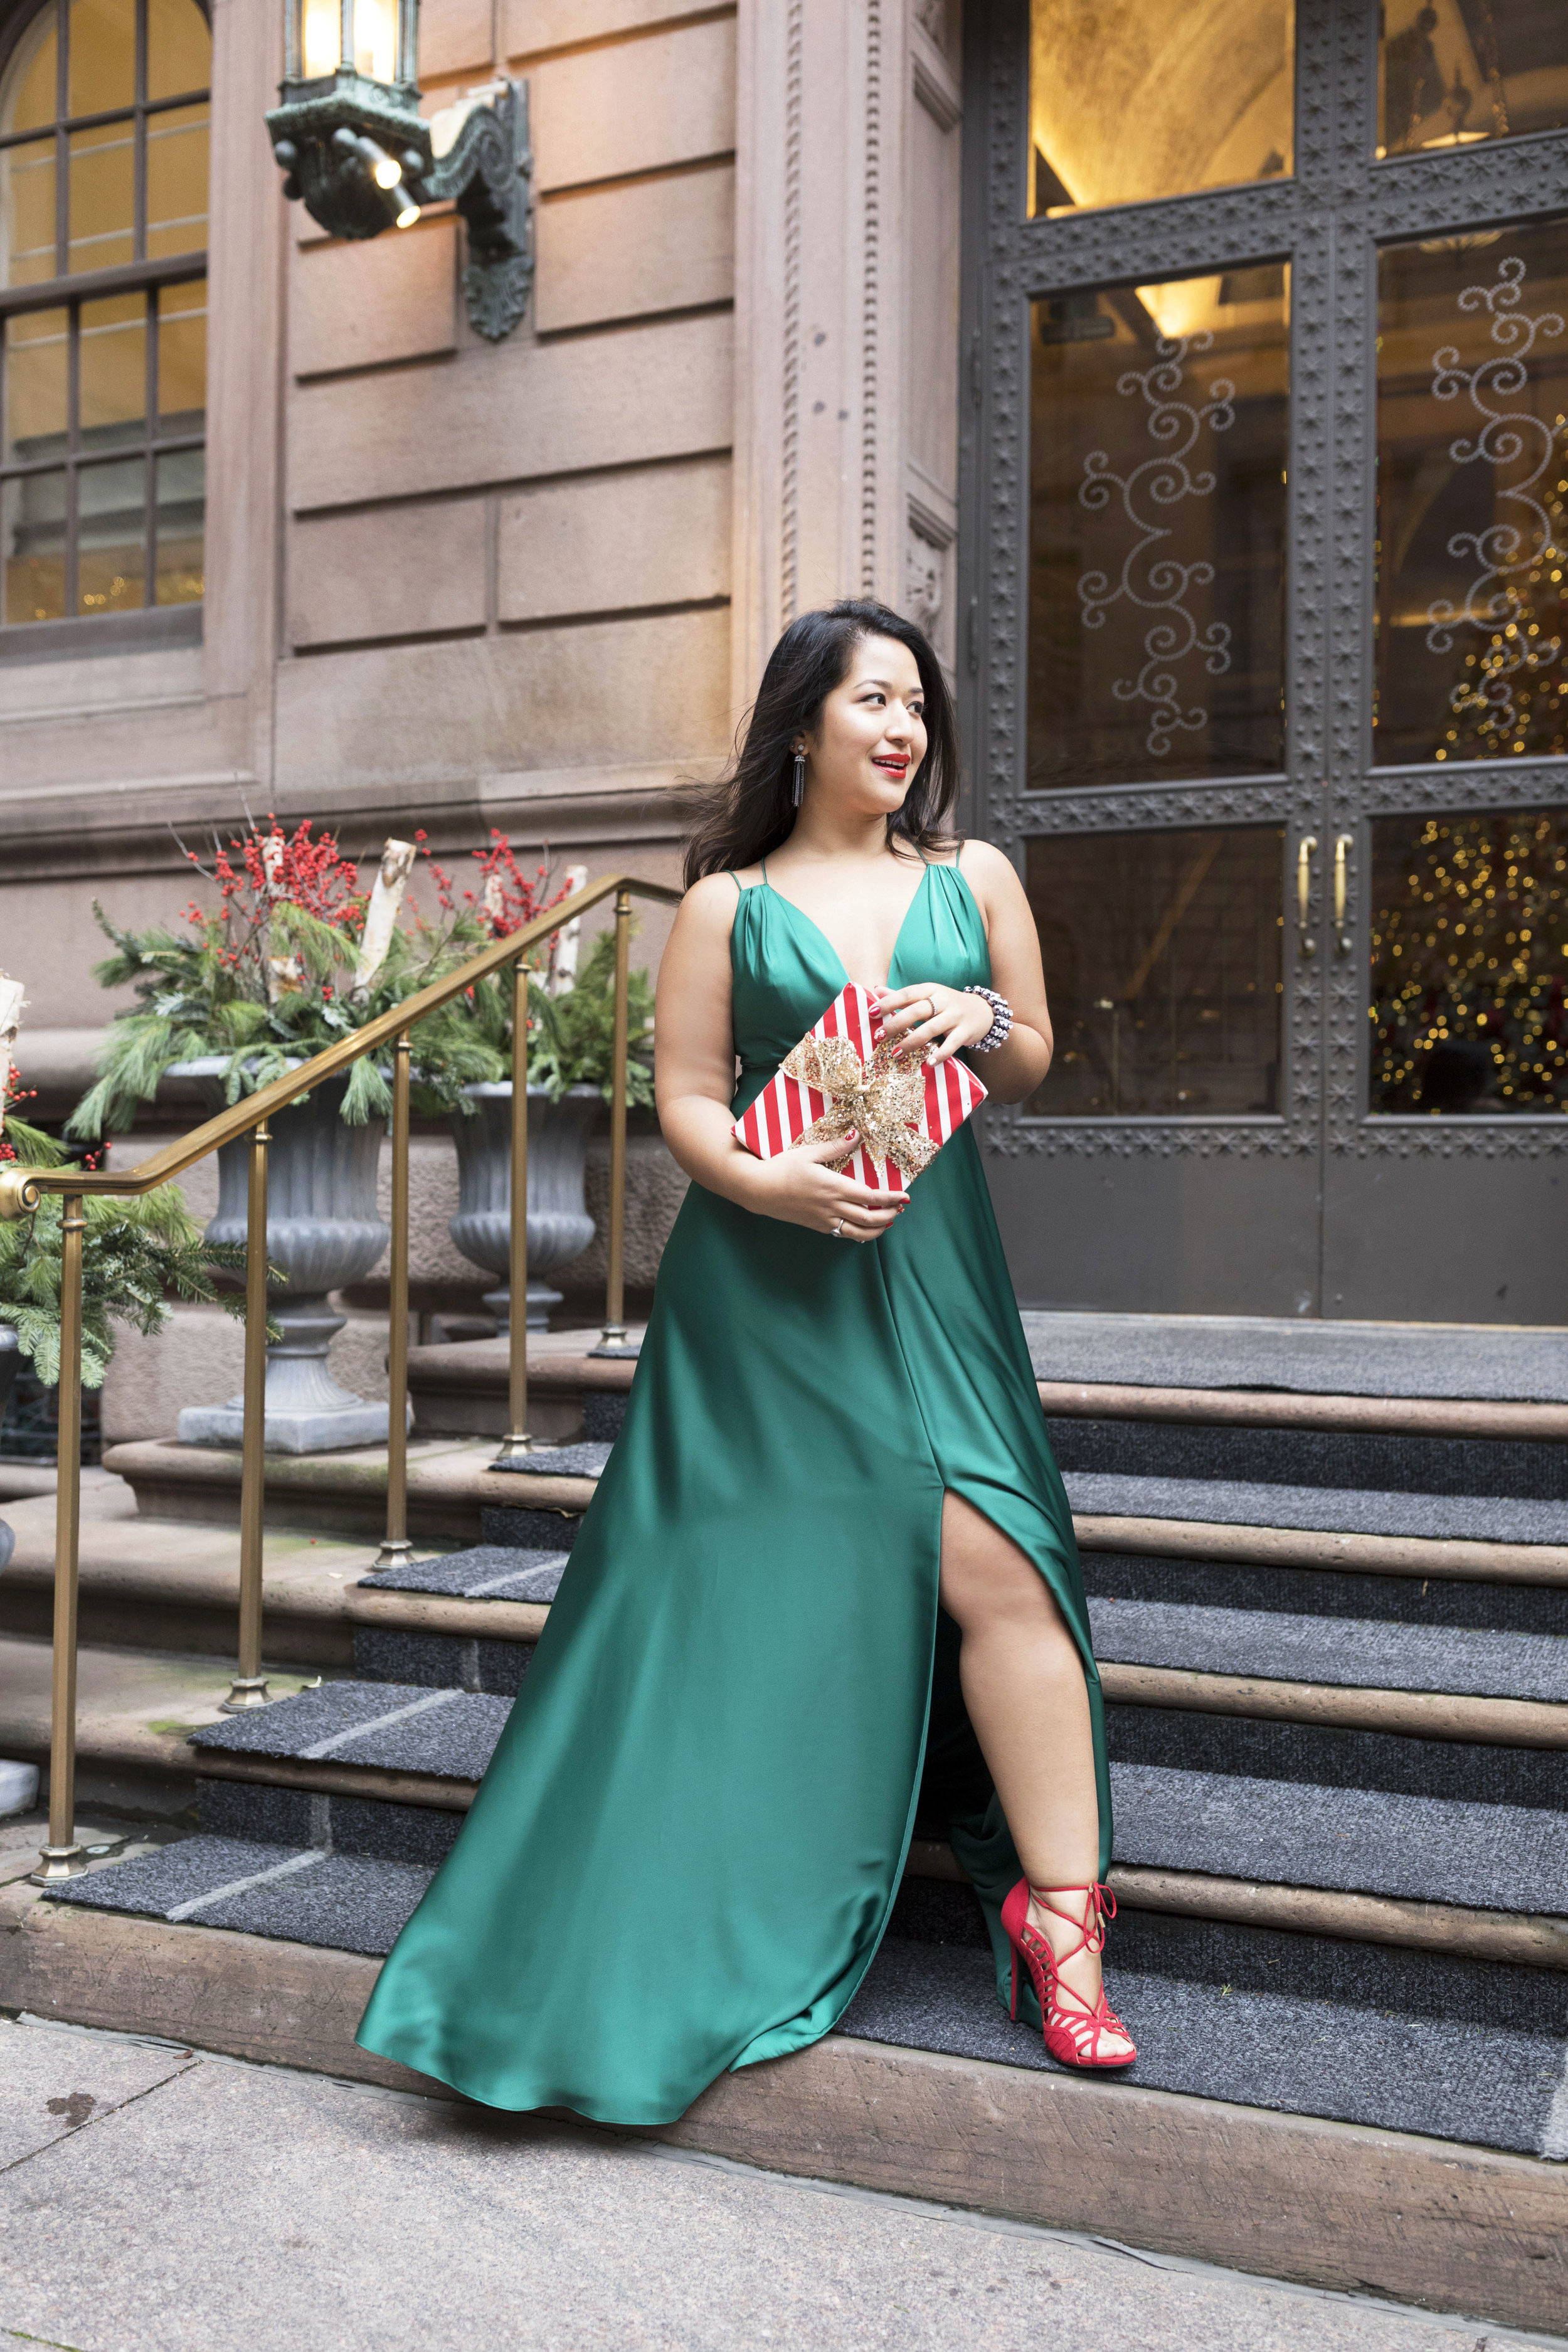 Krity S x Holiday Outfit x Forest Silk Aidan Mattox Gown 8.jpg